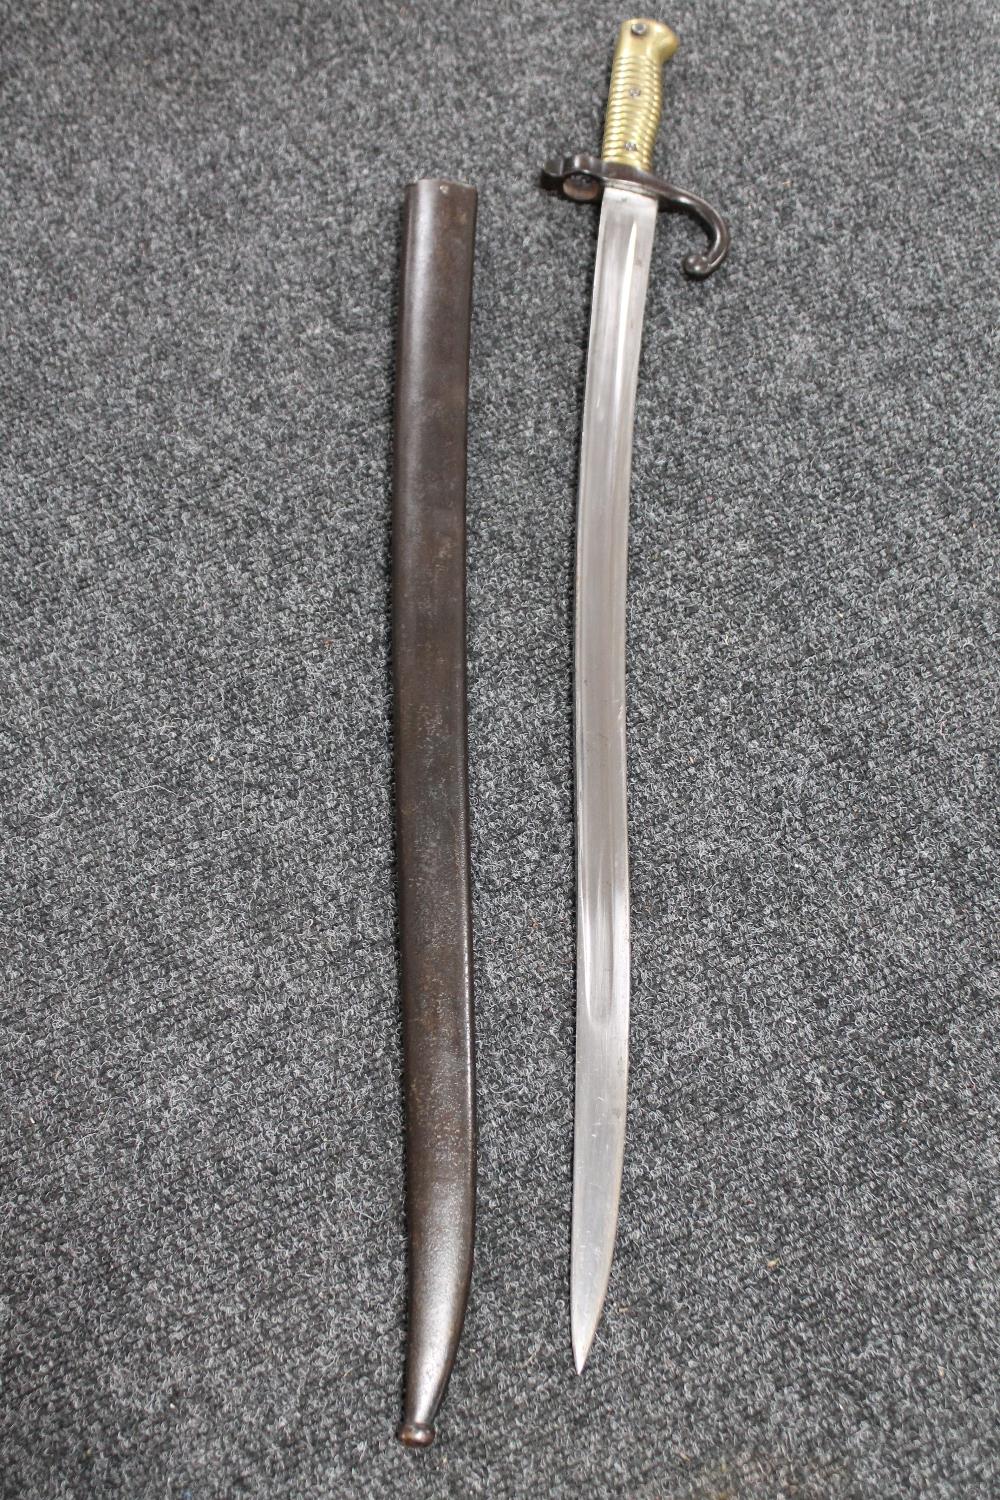 A 19th century French Chassepot bayonet in scabbard